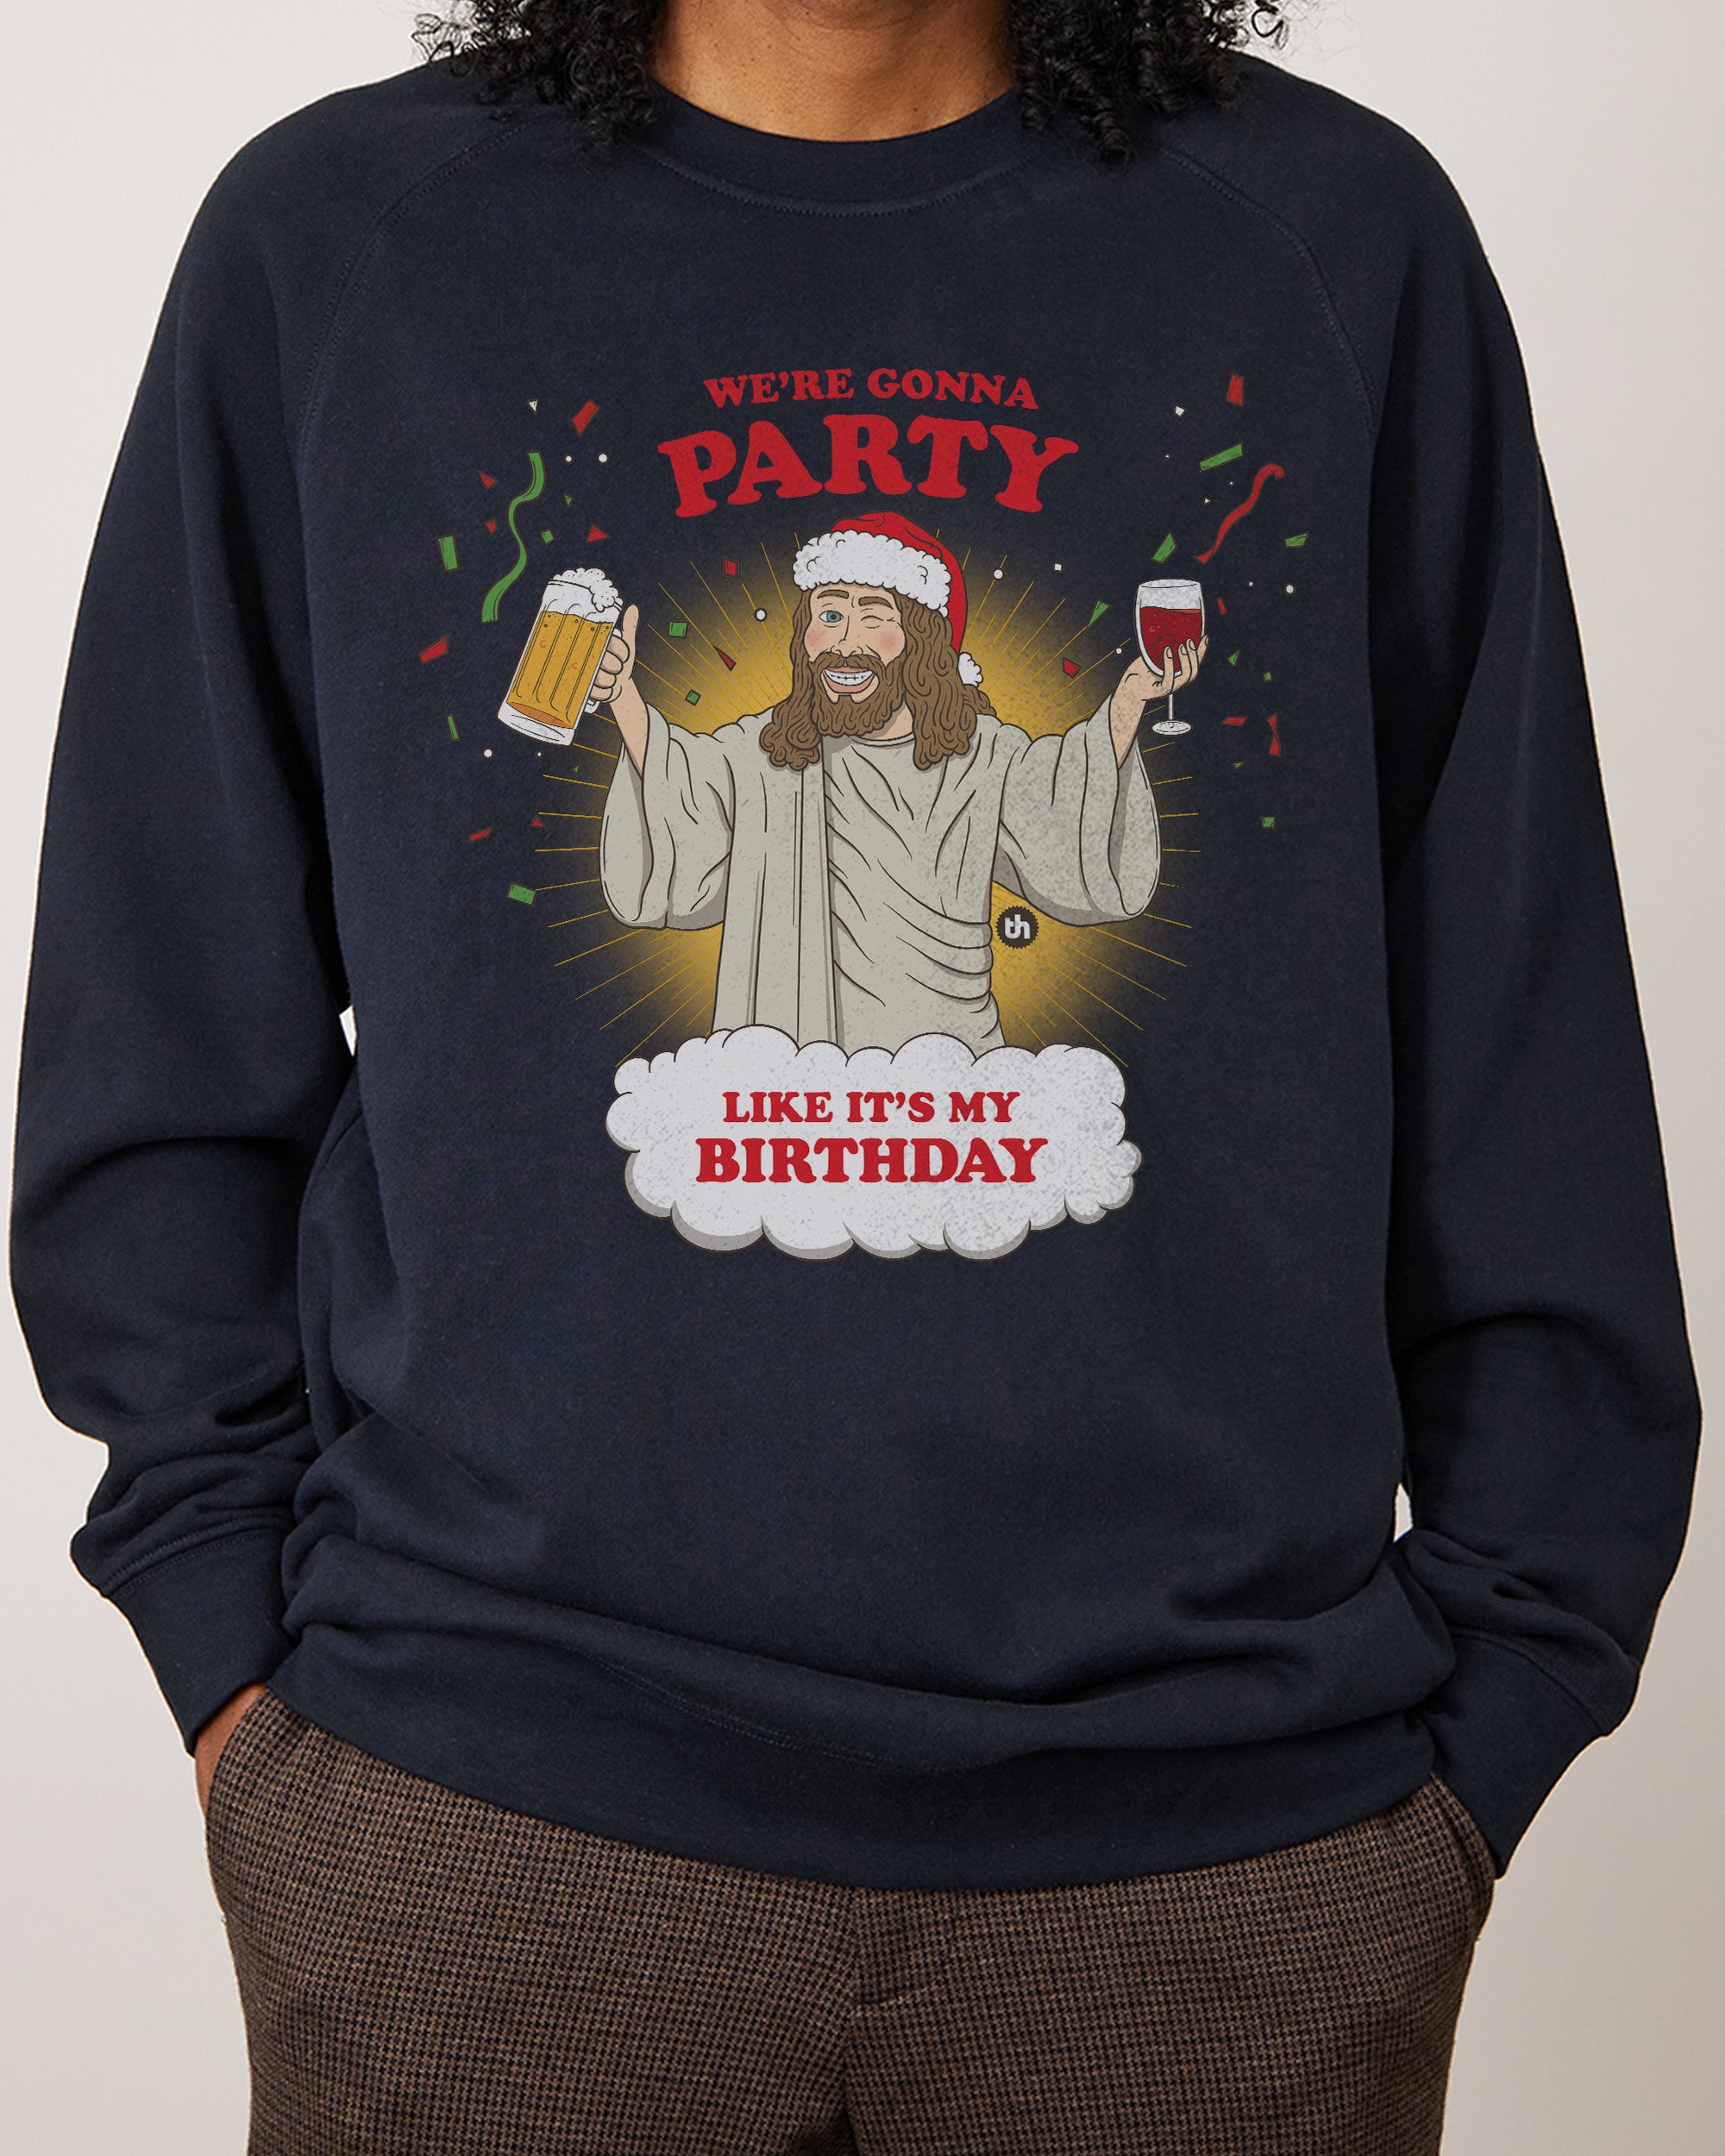 We're Going to Party Like It's My Birthday Jumper